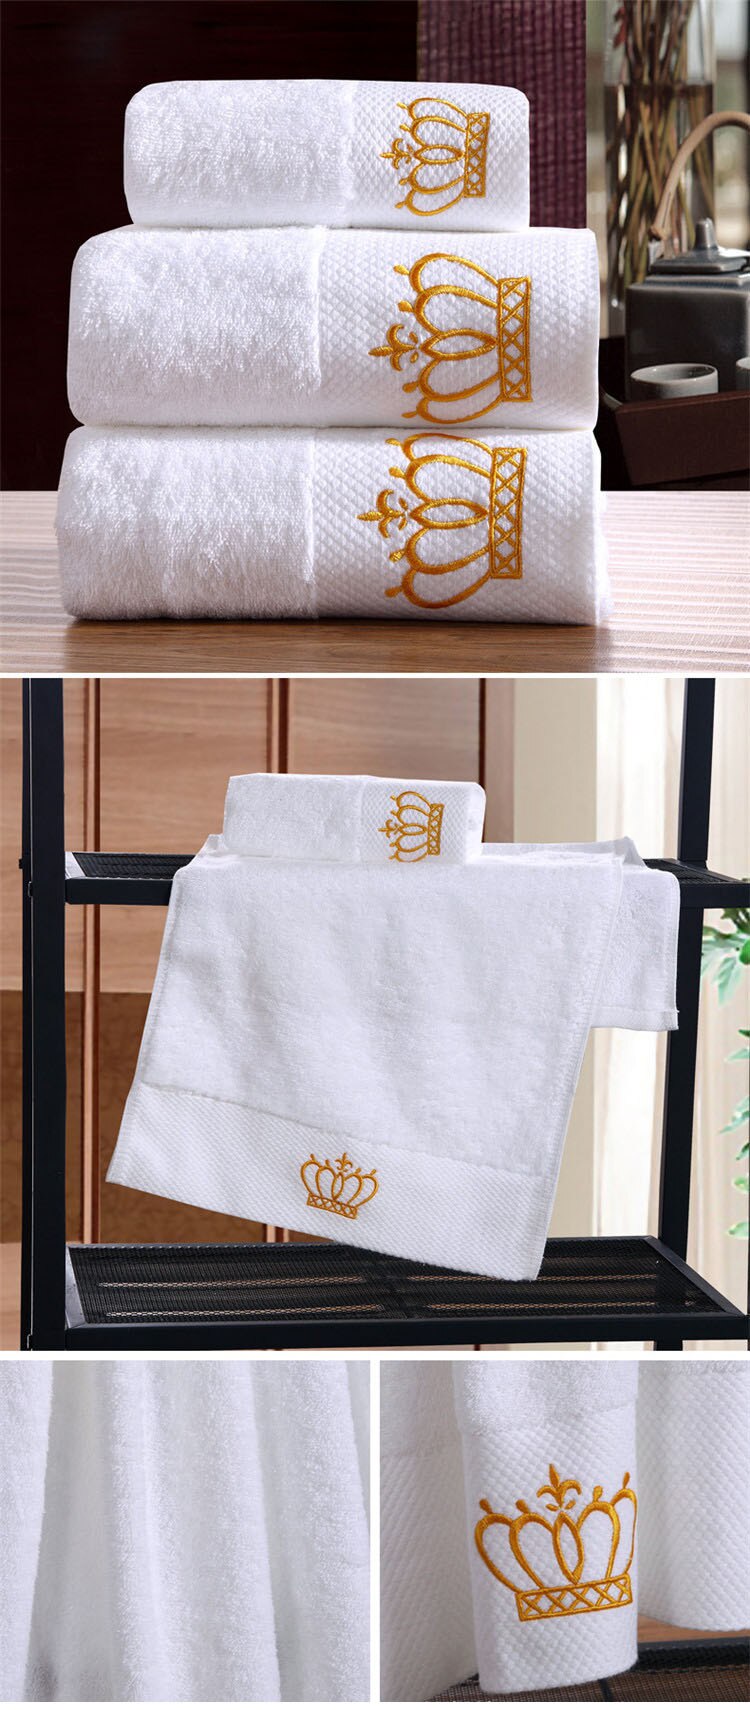 Cotton White Towel Set High Quality Crown Embroidery Absorbent Bath Towels 